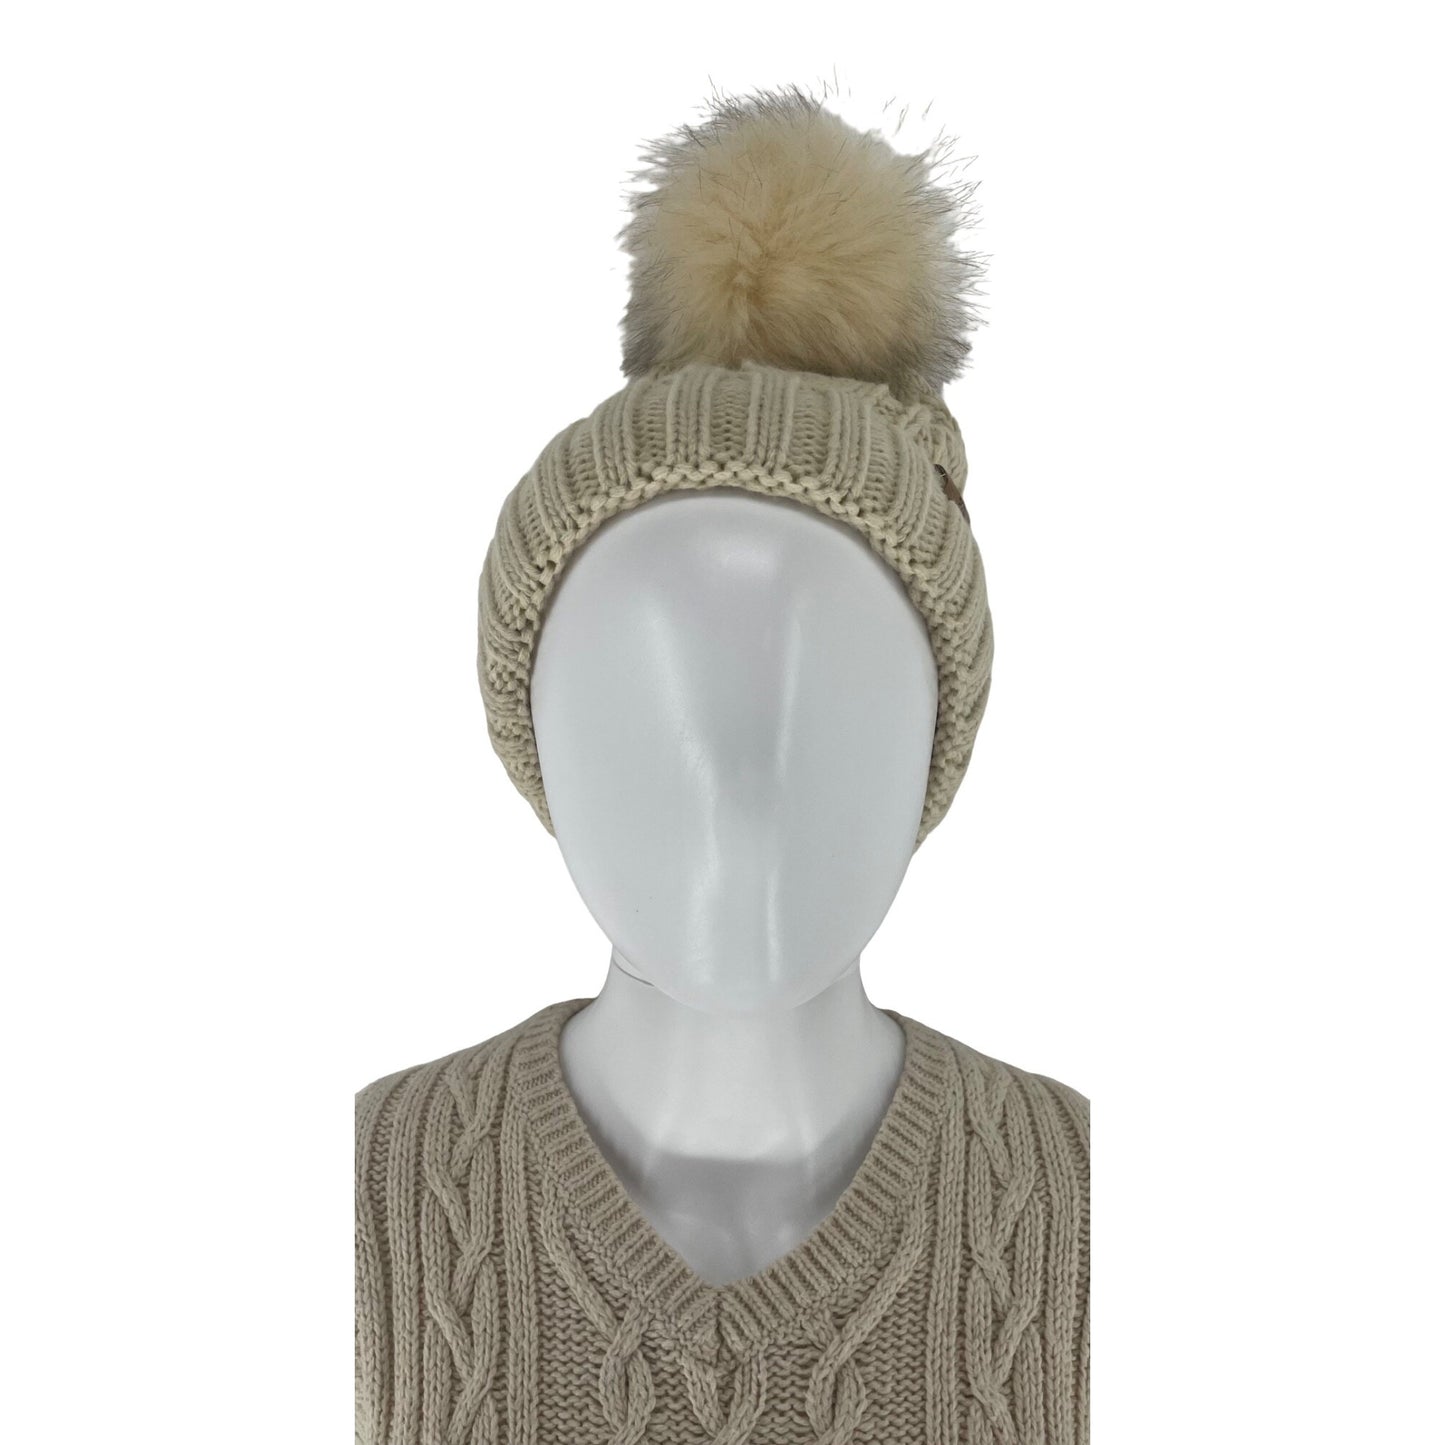 Redess Women's Size Small Cream Cable-Knit Faux Fur Pom Pom Beanie